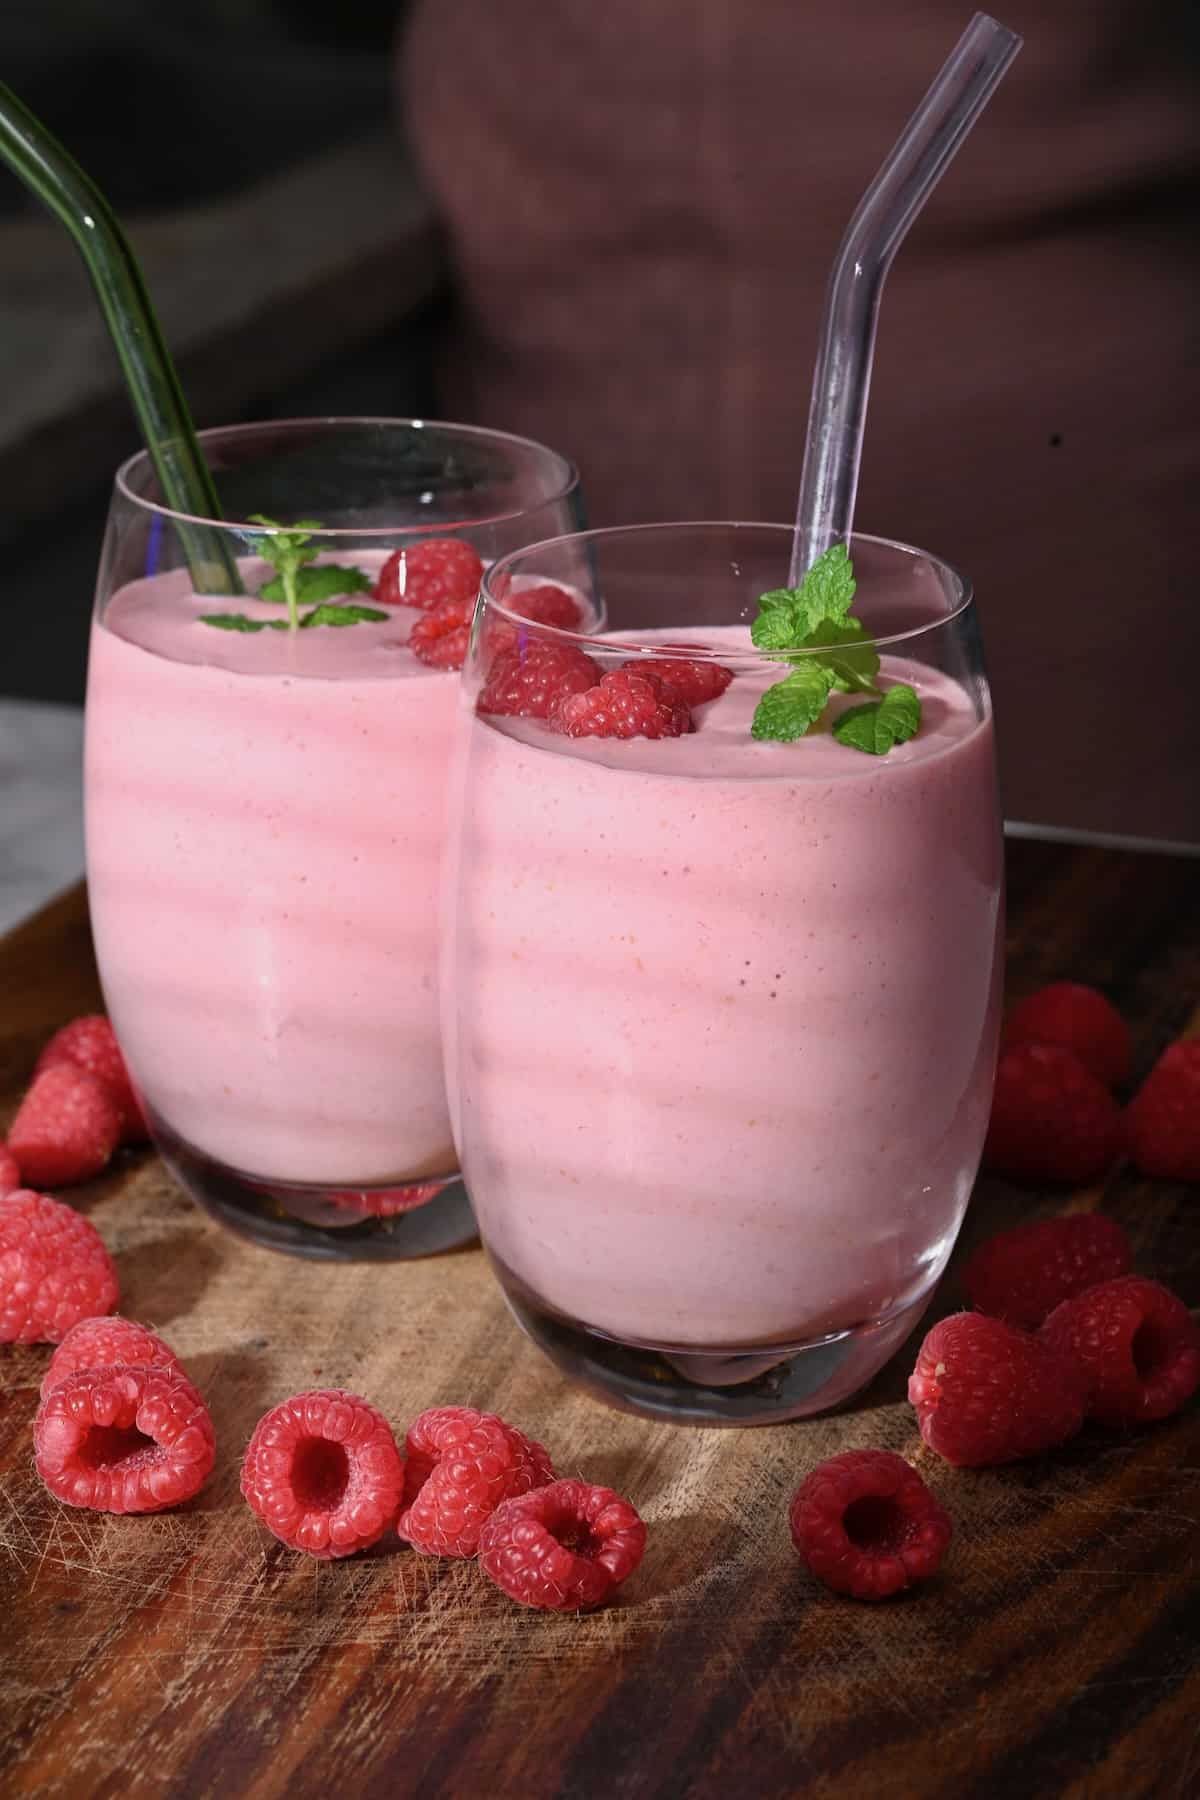 Two galsses with raspberry smoothie